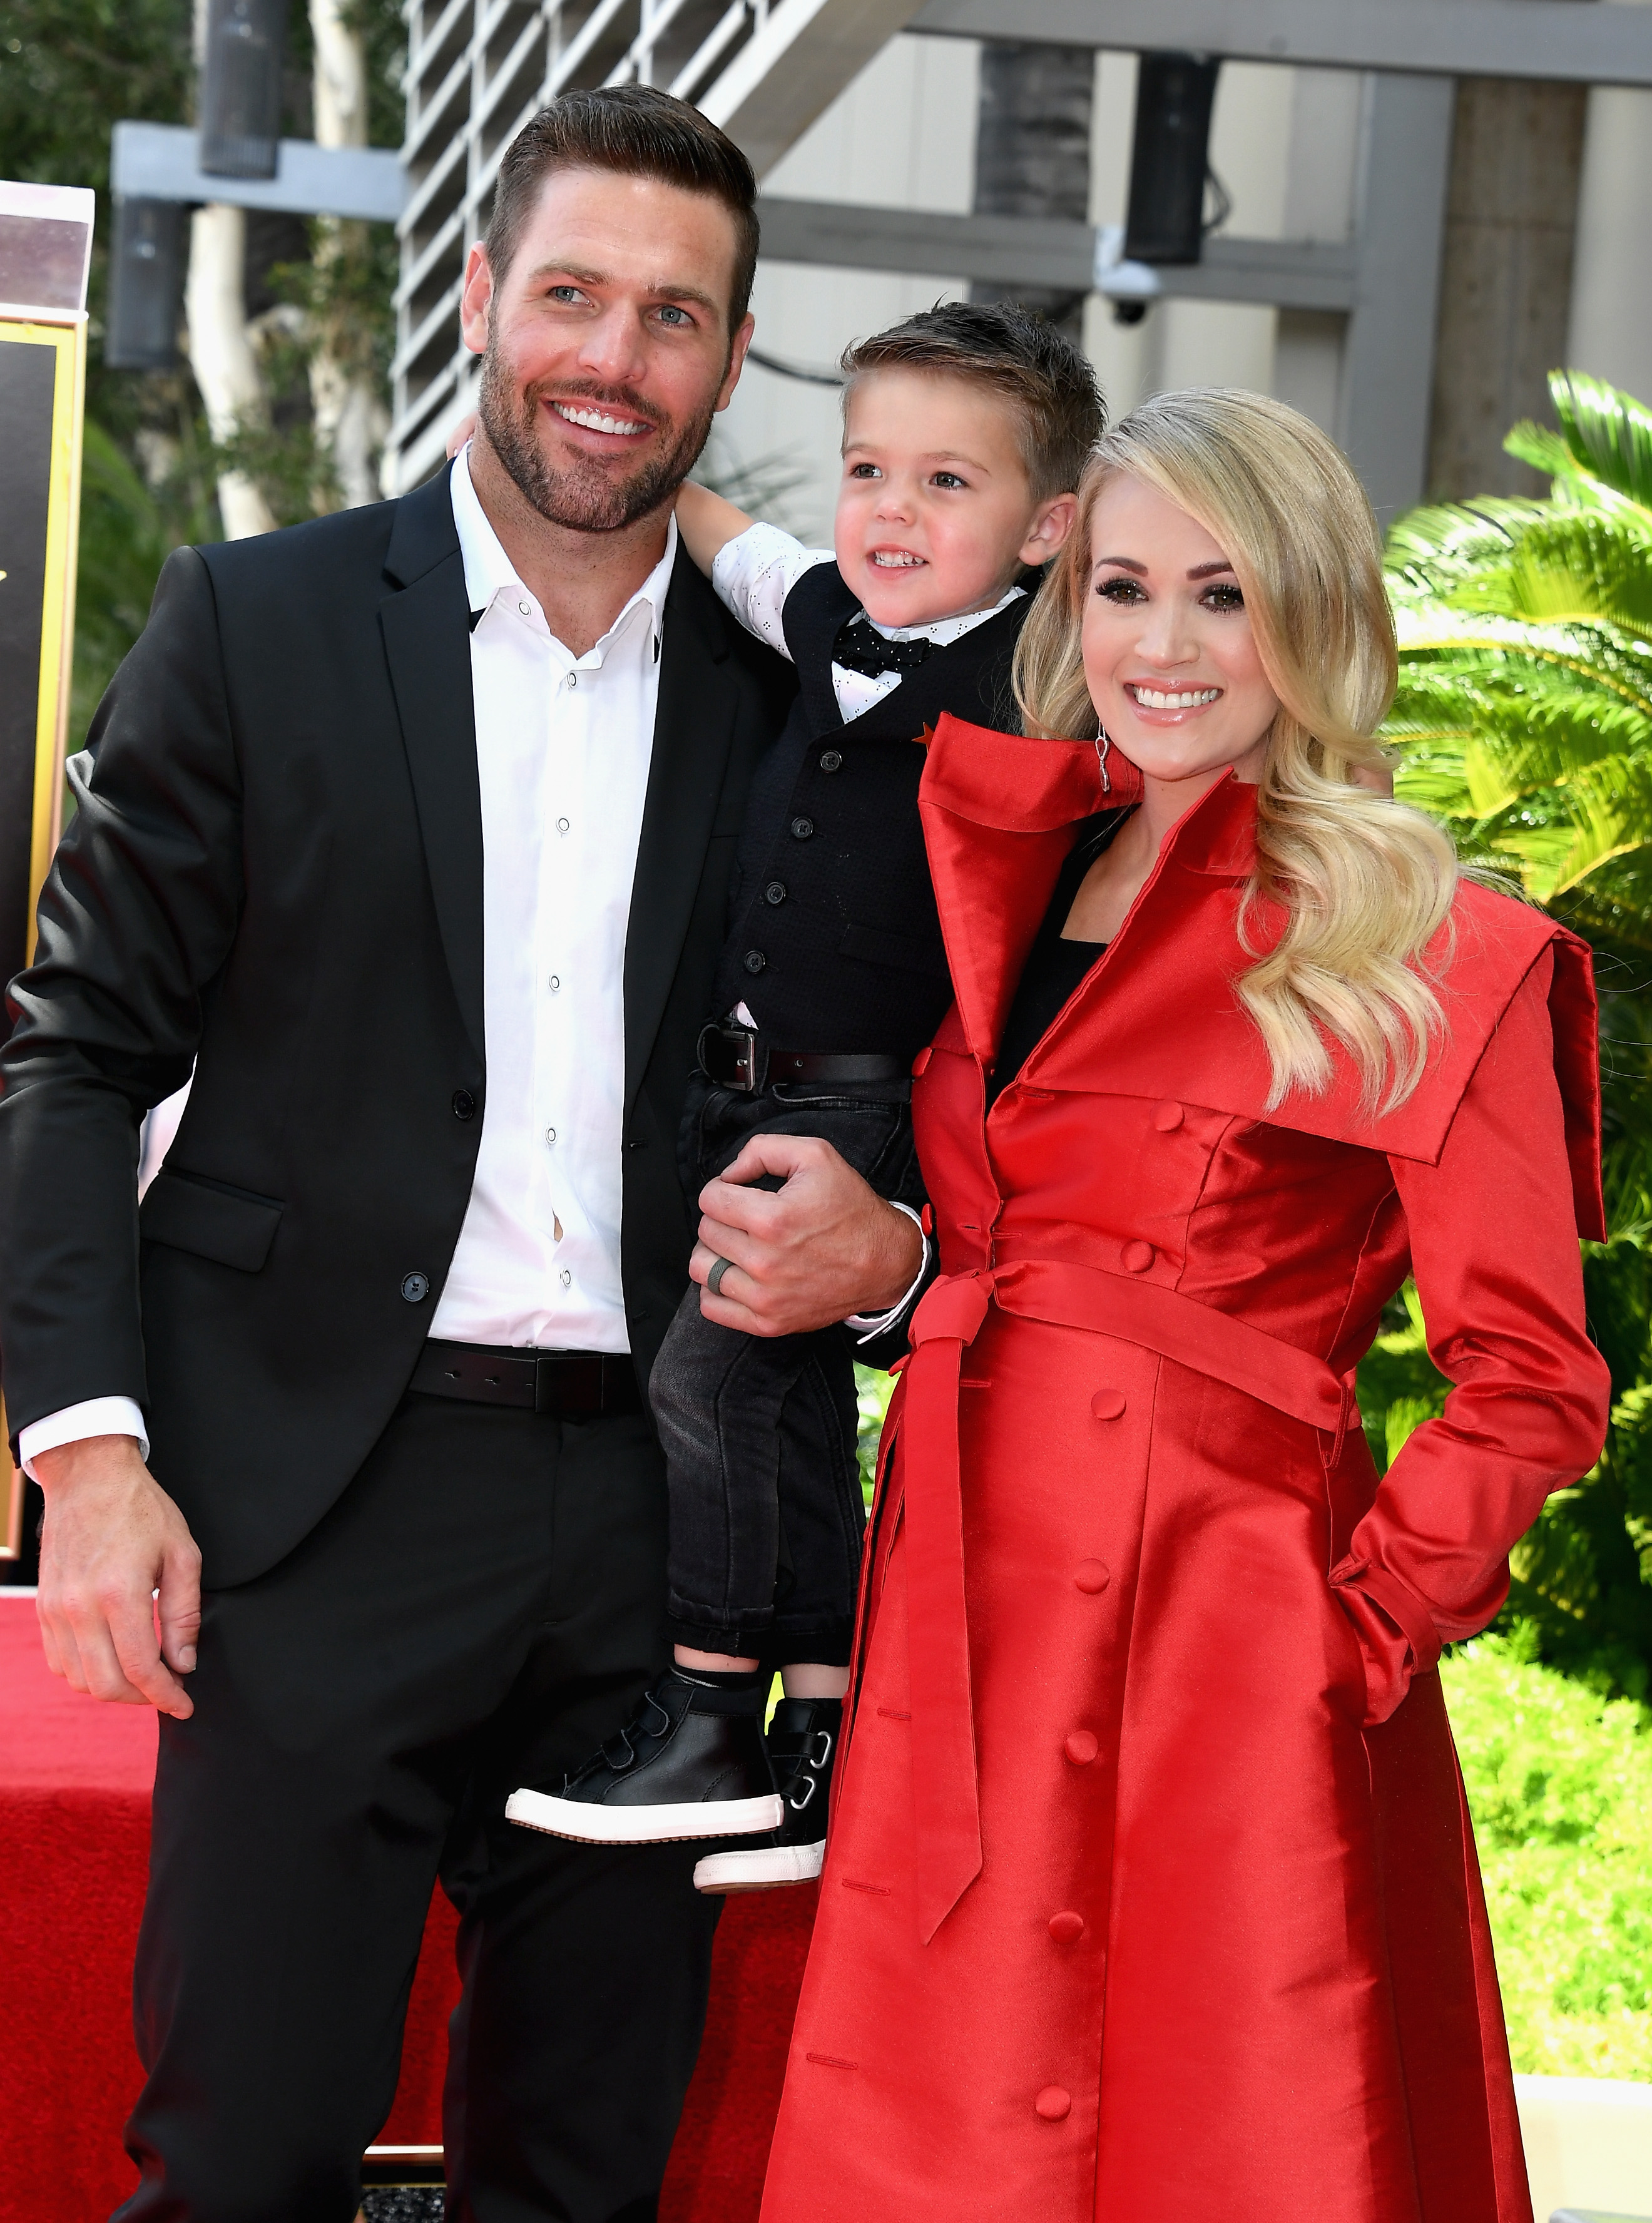 Carrie Underwood, Mike Fisher and their son Isaiah, 2016 | Source: Getty Images